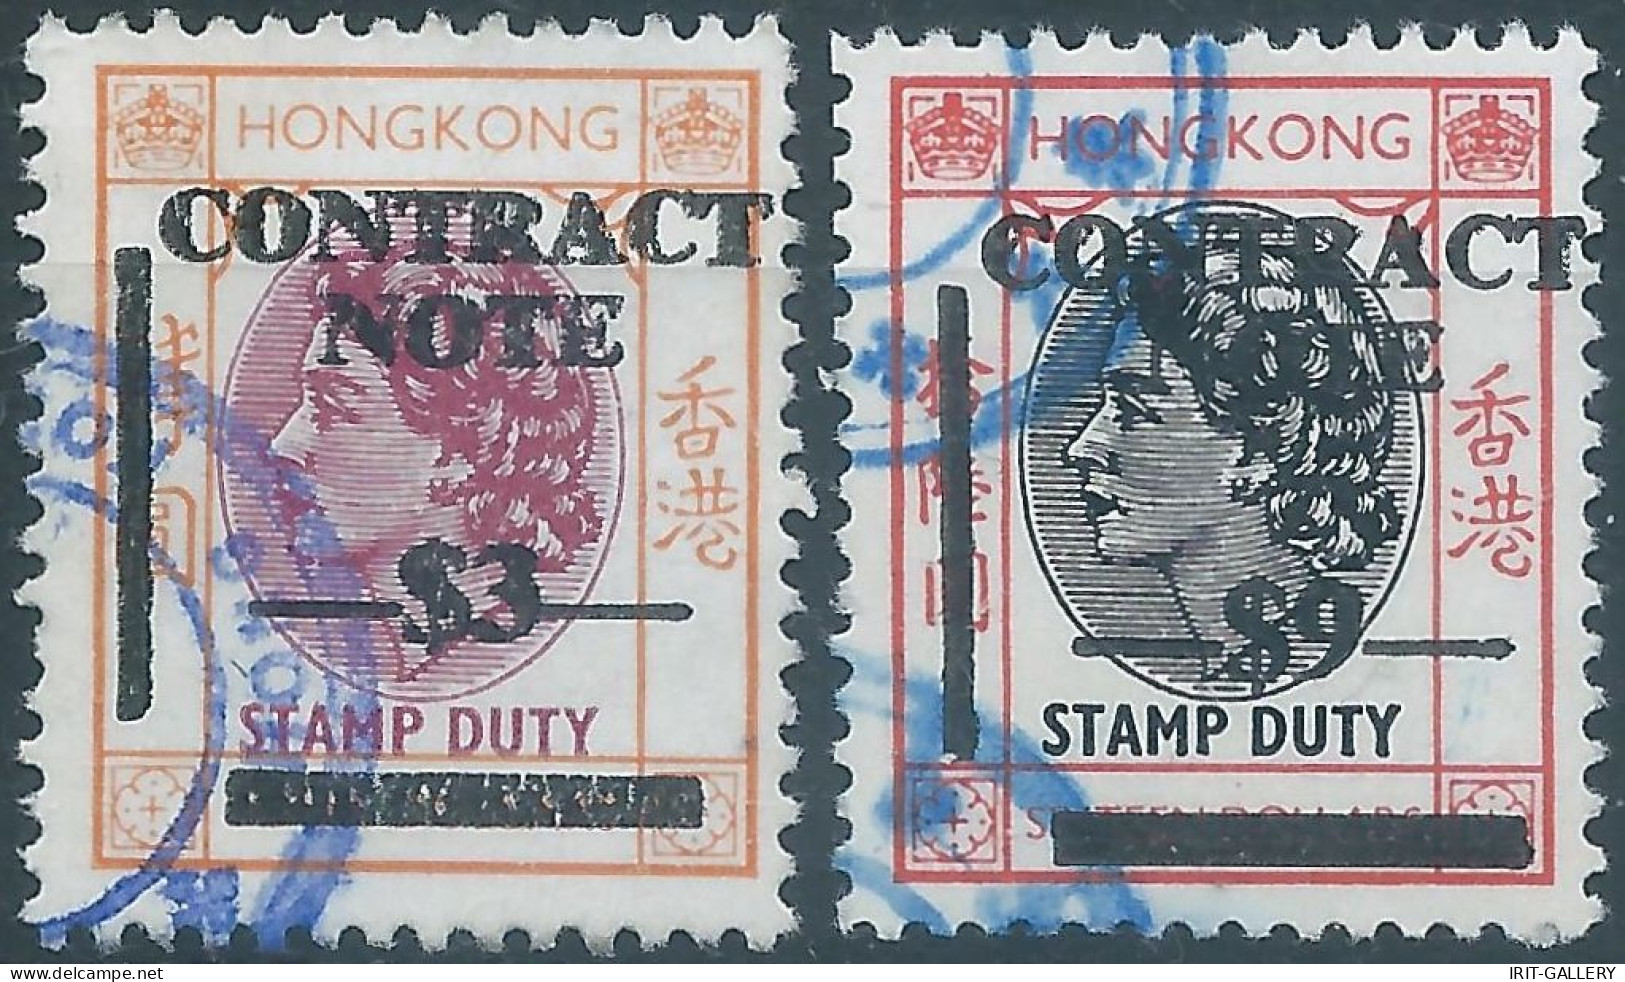 Great Britain-ENGLAND,HONG KONG Revenue Tax Fiscal  Stamp DUTY Contract Note, $3 & $9 , Obliterated - Timbres Fiscaux-postaux